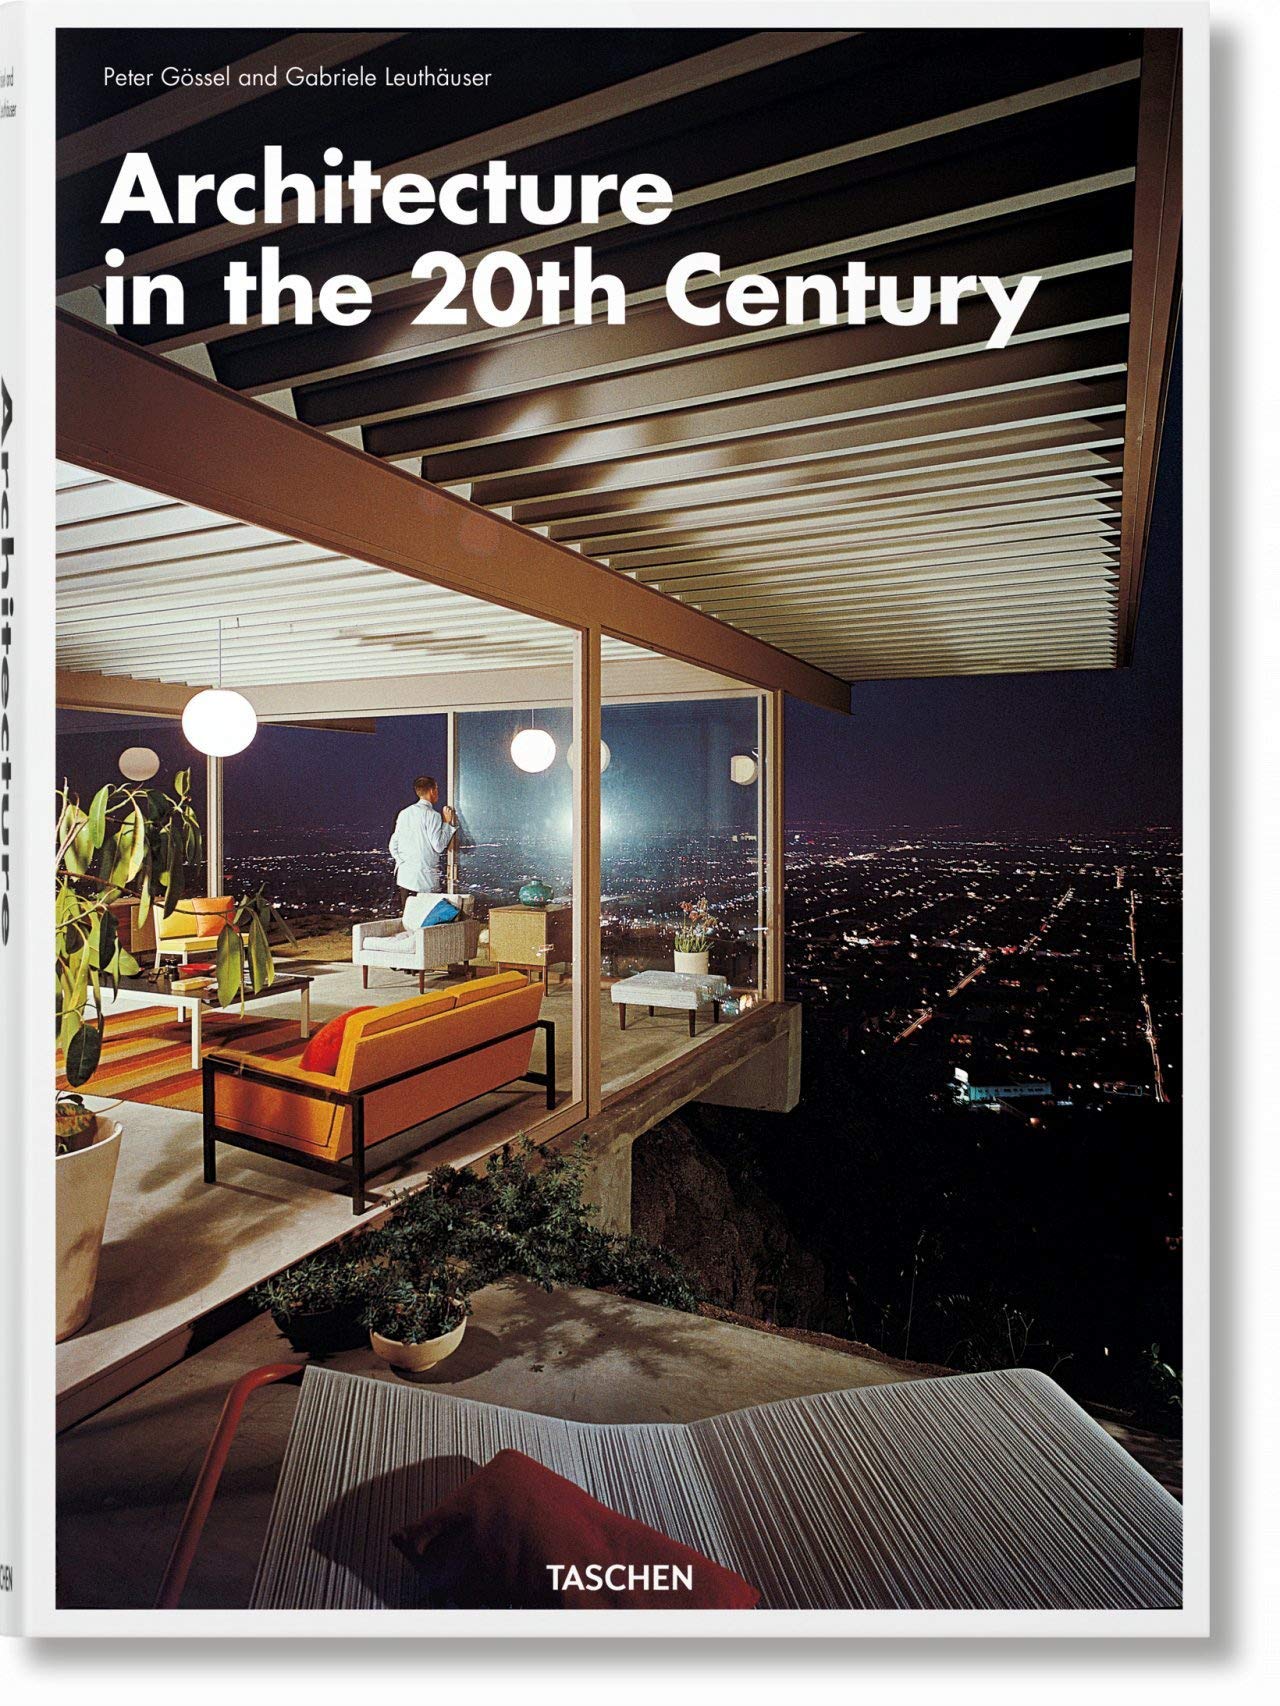 Architecture in the 20th Century | Peter Gossel, Gabriele Leuthauser